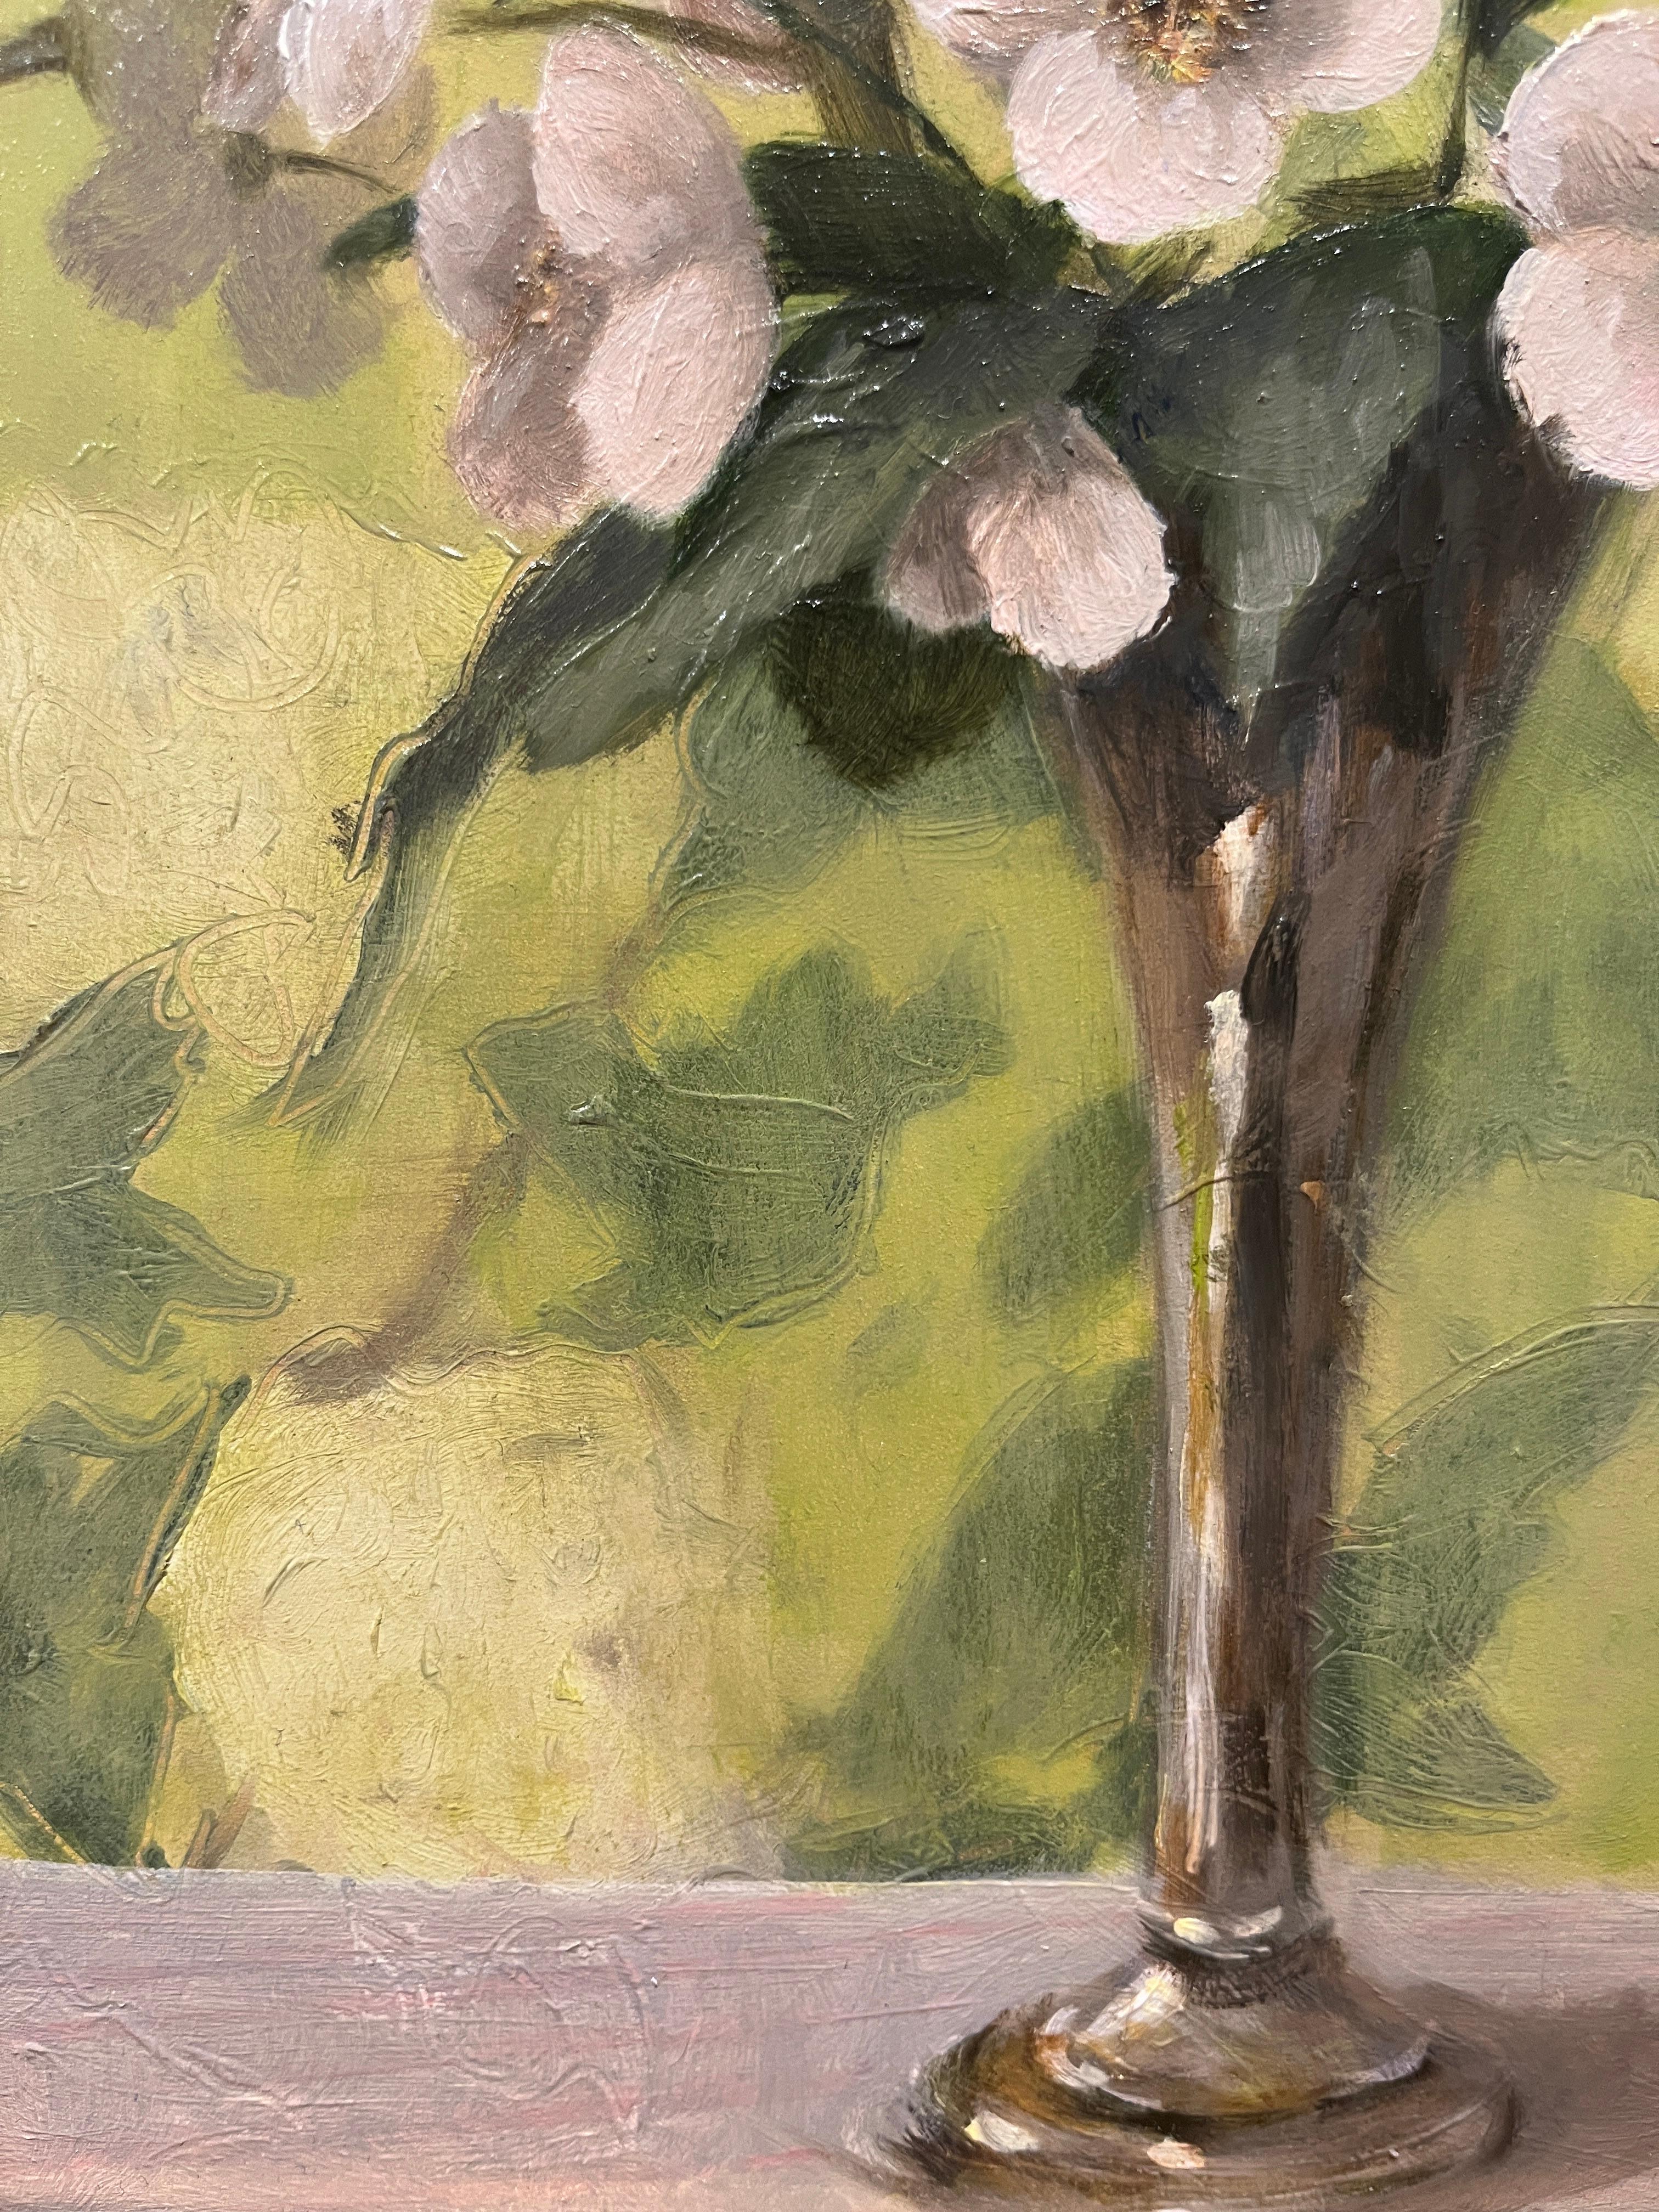  An original oil painting by GC Williams. This piece is named after the painter Pierre Bonnard, whose painting Williams' painted a loose copy of in the background of this piece.

Williams has a degree in art history which gave her an understanding